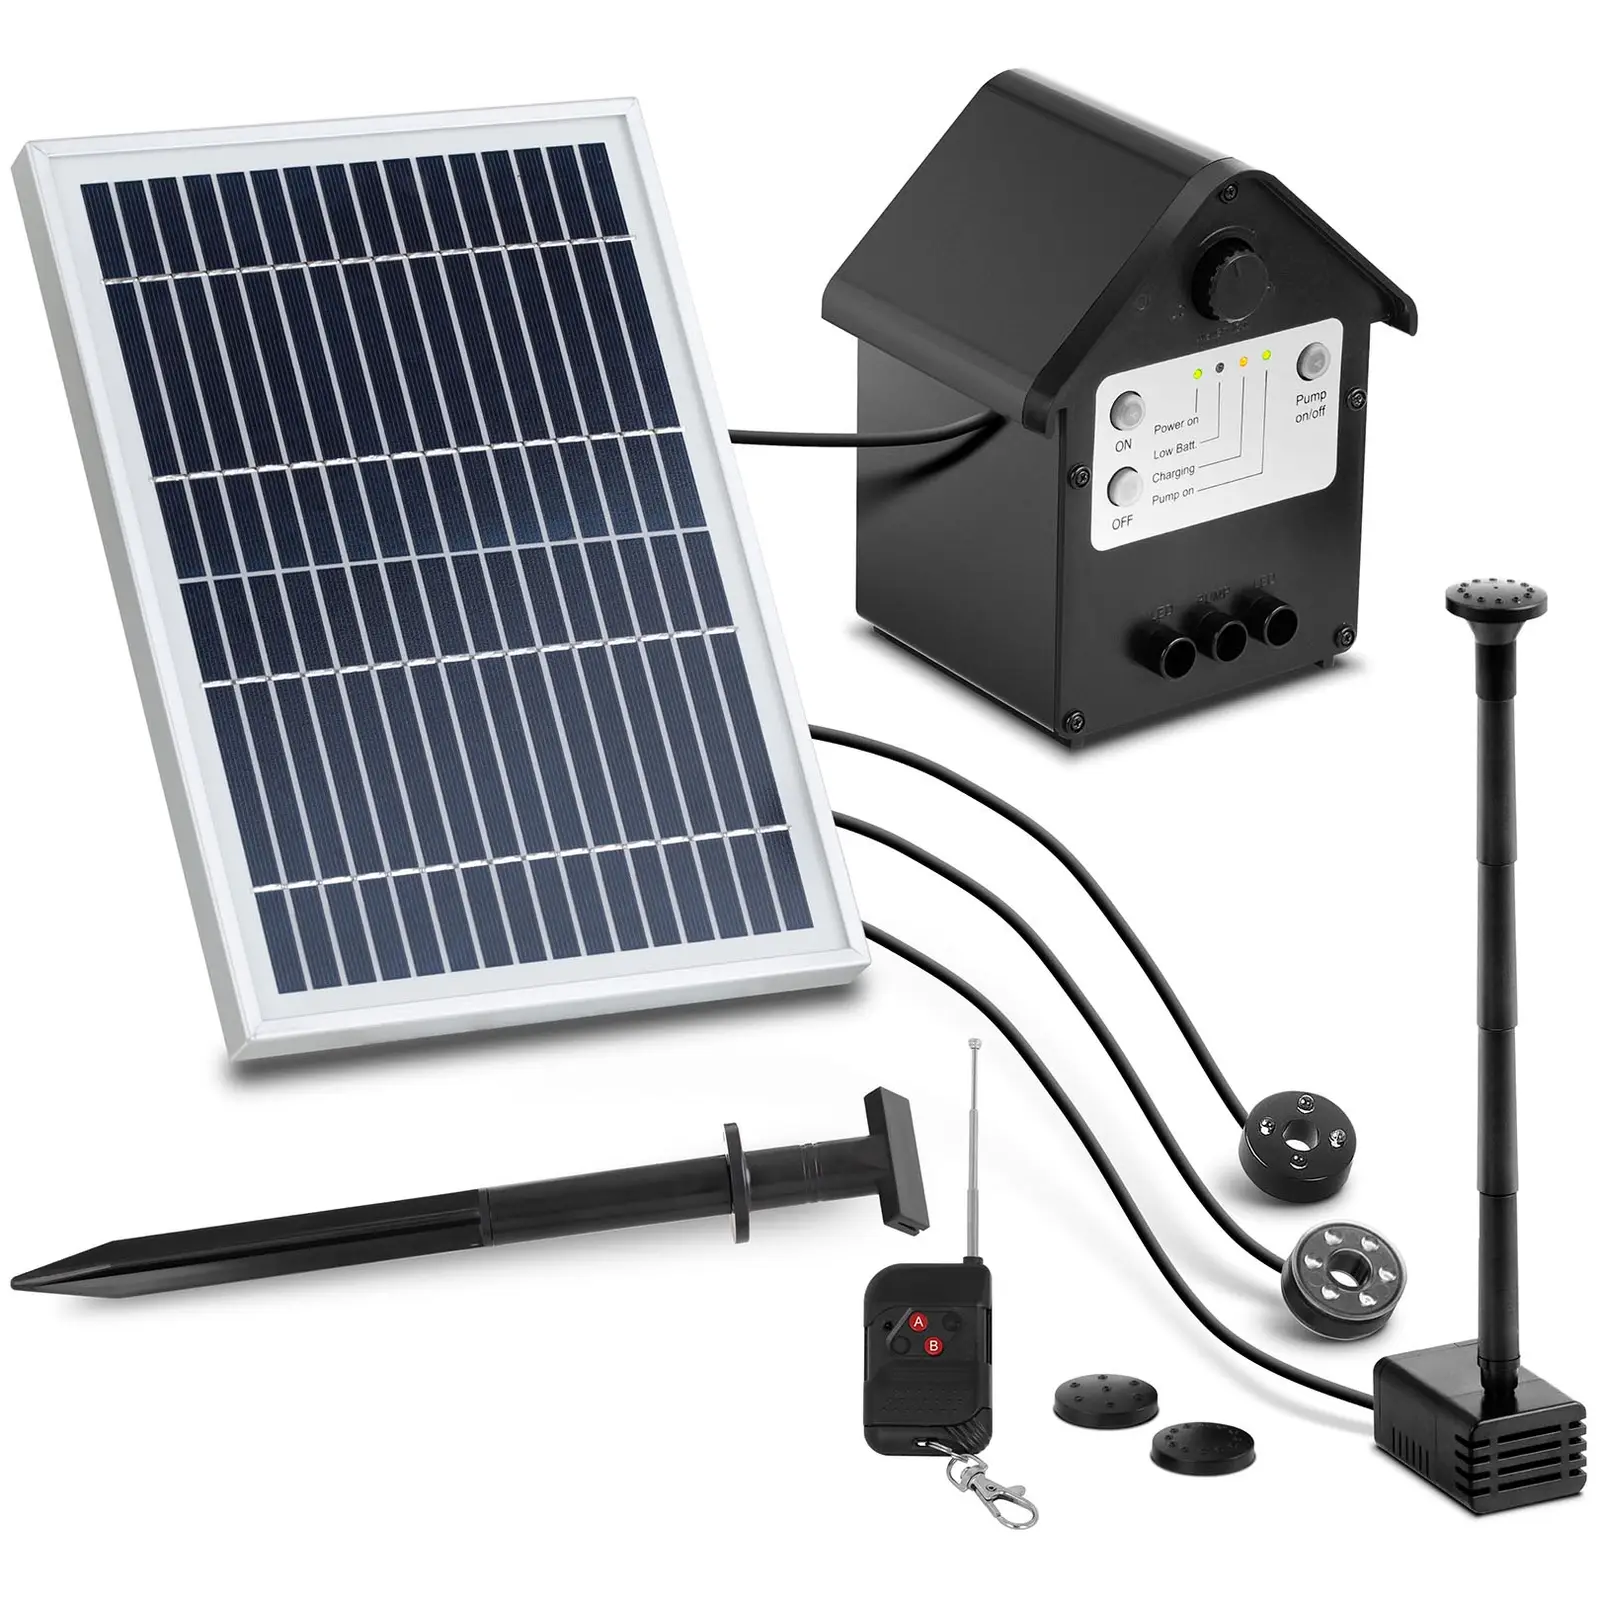 Solar Powered Pond Pump - 250 L/hr - LED - with remote control